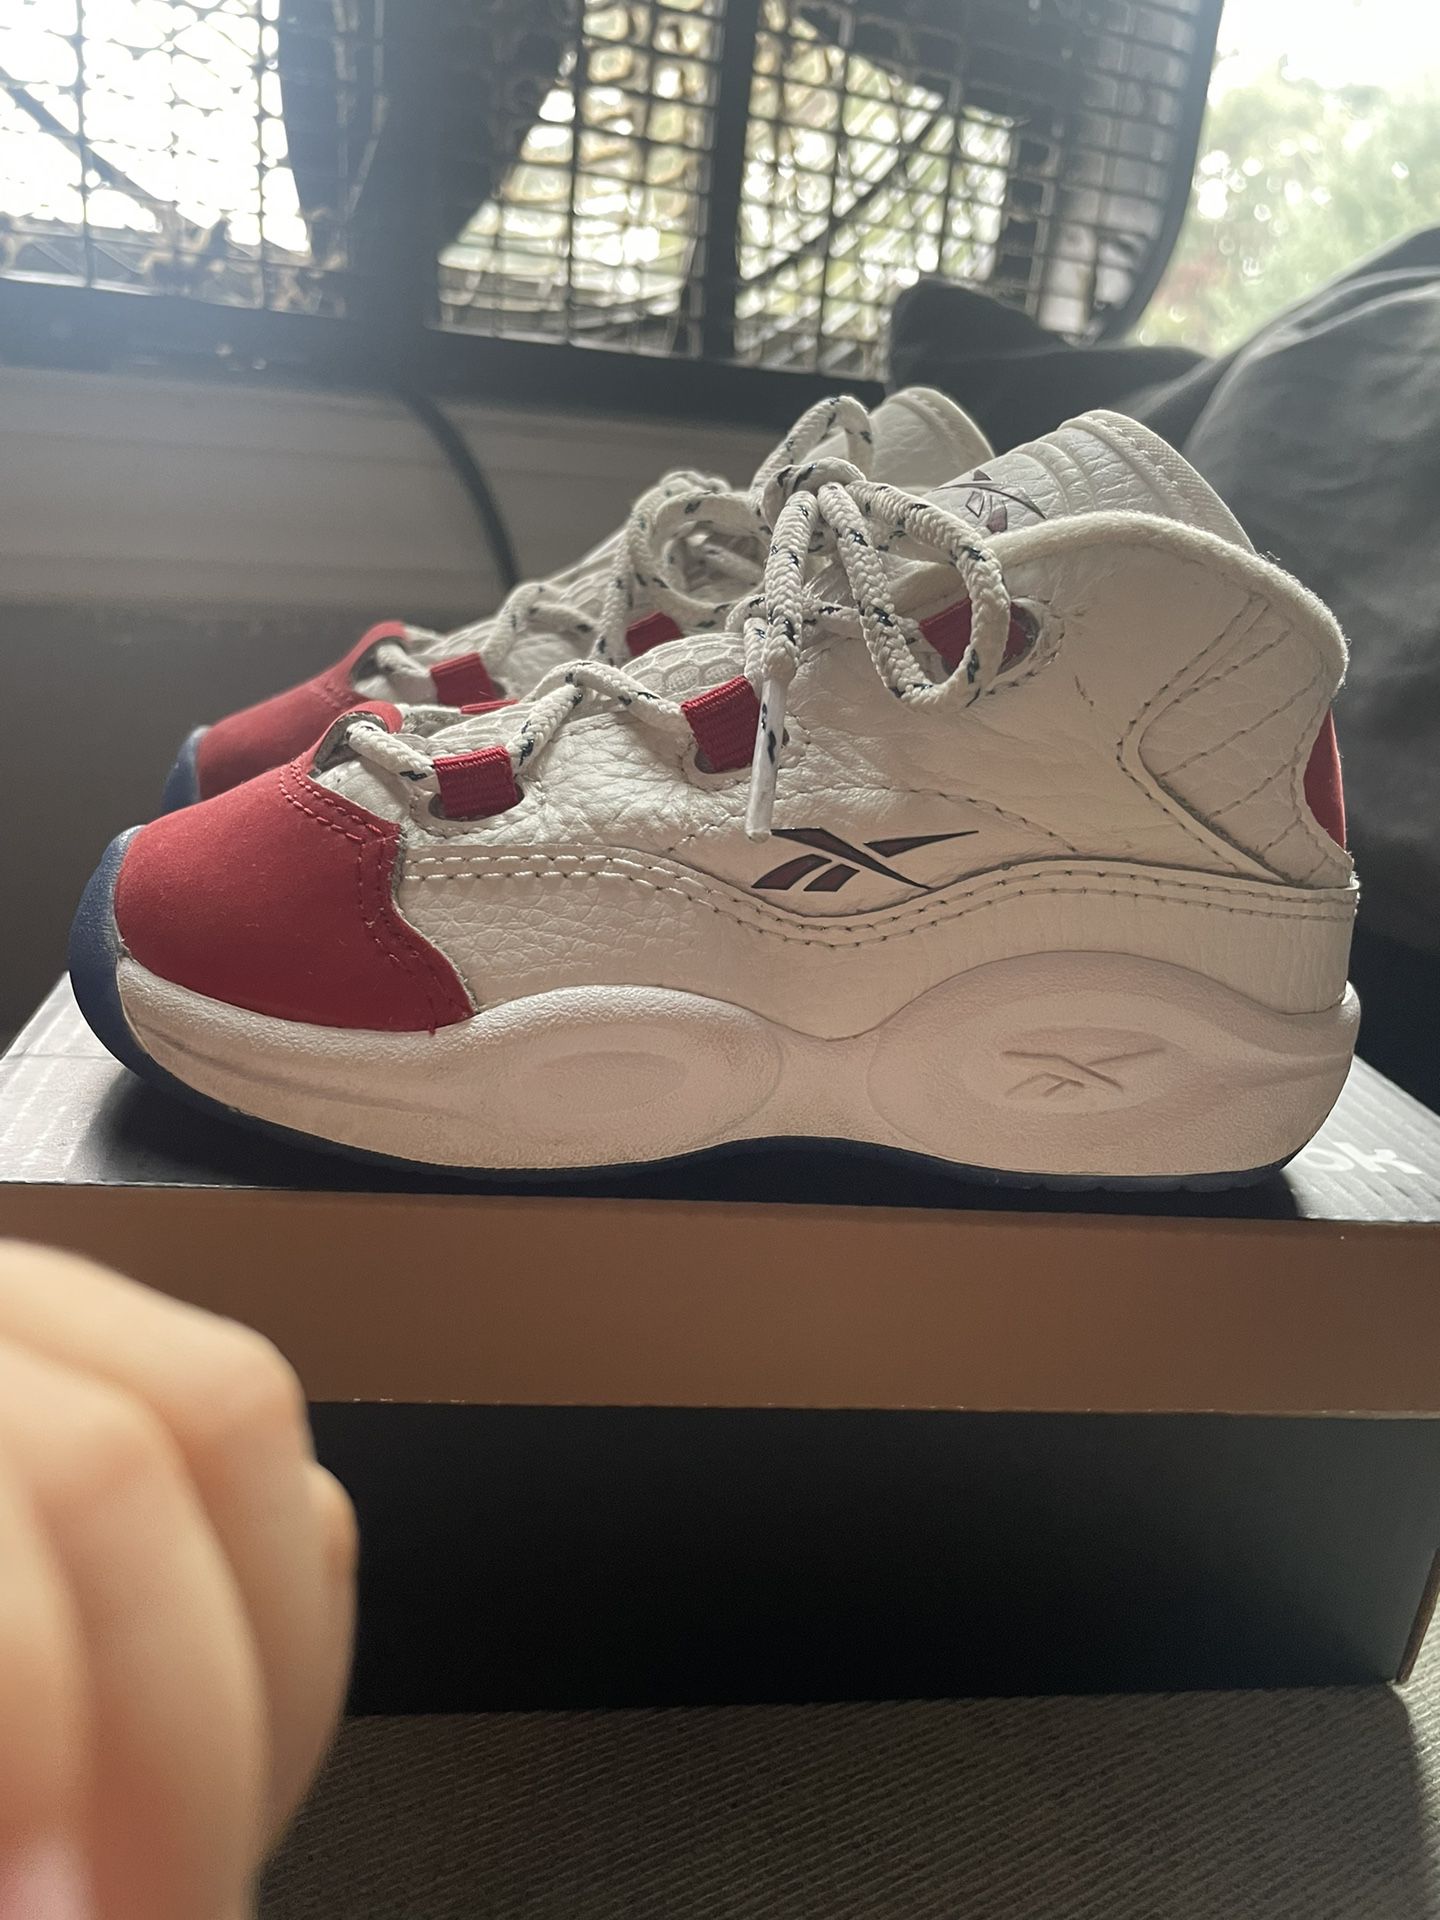 TODDLER REEBOK QUESTION MID 